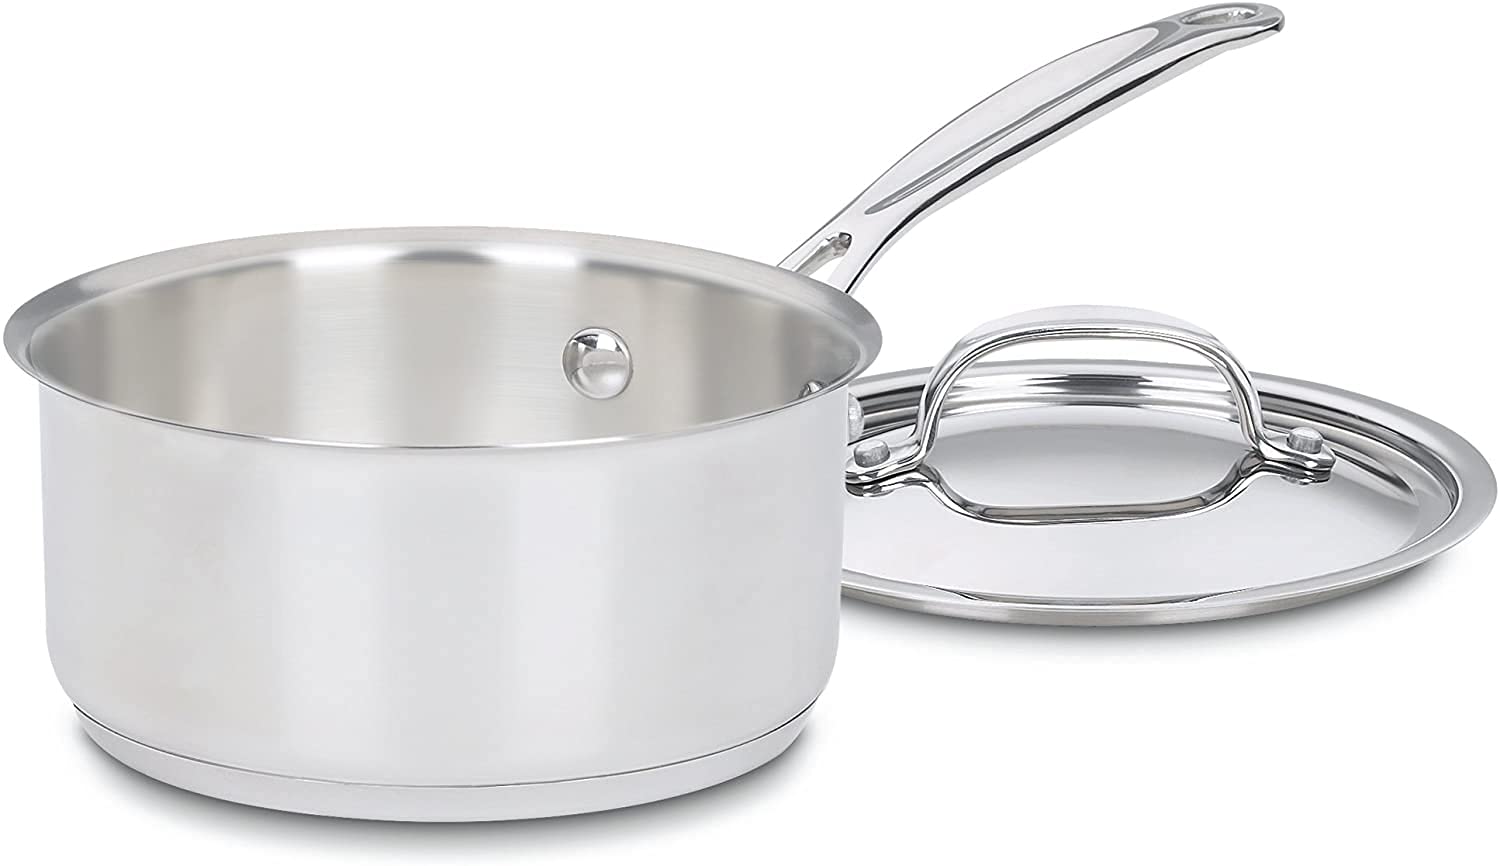 Cuisinart 719-16 1.5-Quart Chef's-Classic-Stainless-Cookware-Collection, Saucepan w/Cover & 719-14 1-Quart Chef's-Classic-Stainless-Cookware-Collection, Saucepan w/Cover